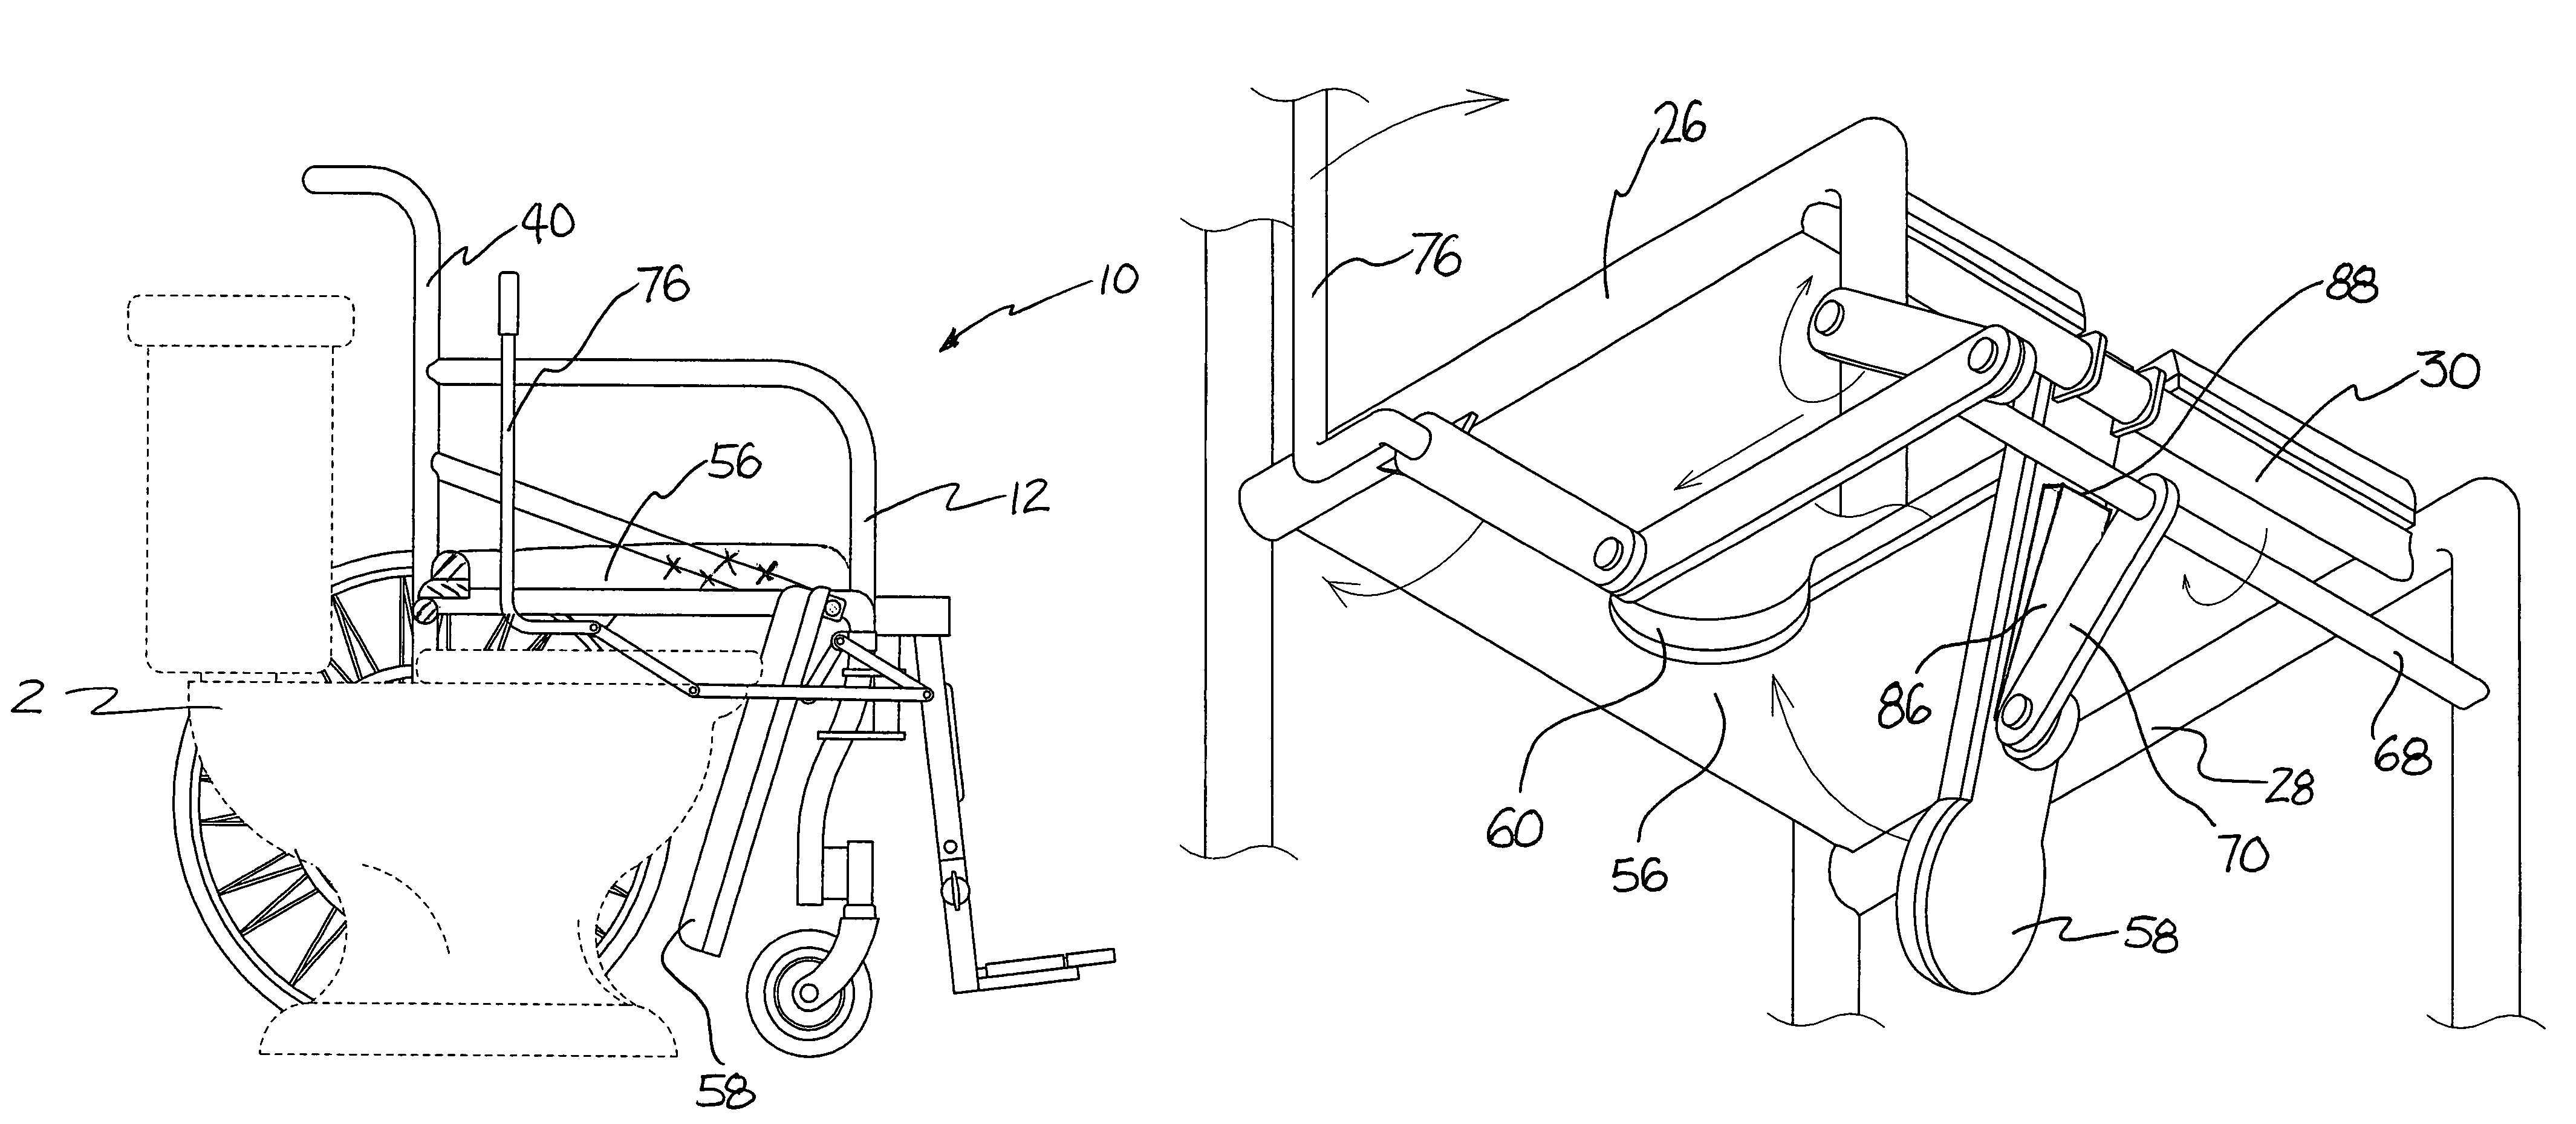 Wheelchair with enhanced toilet accessibility